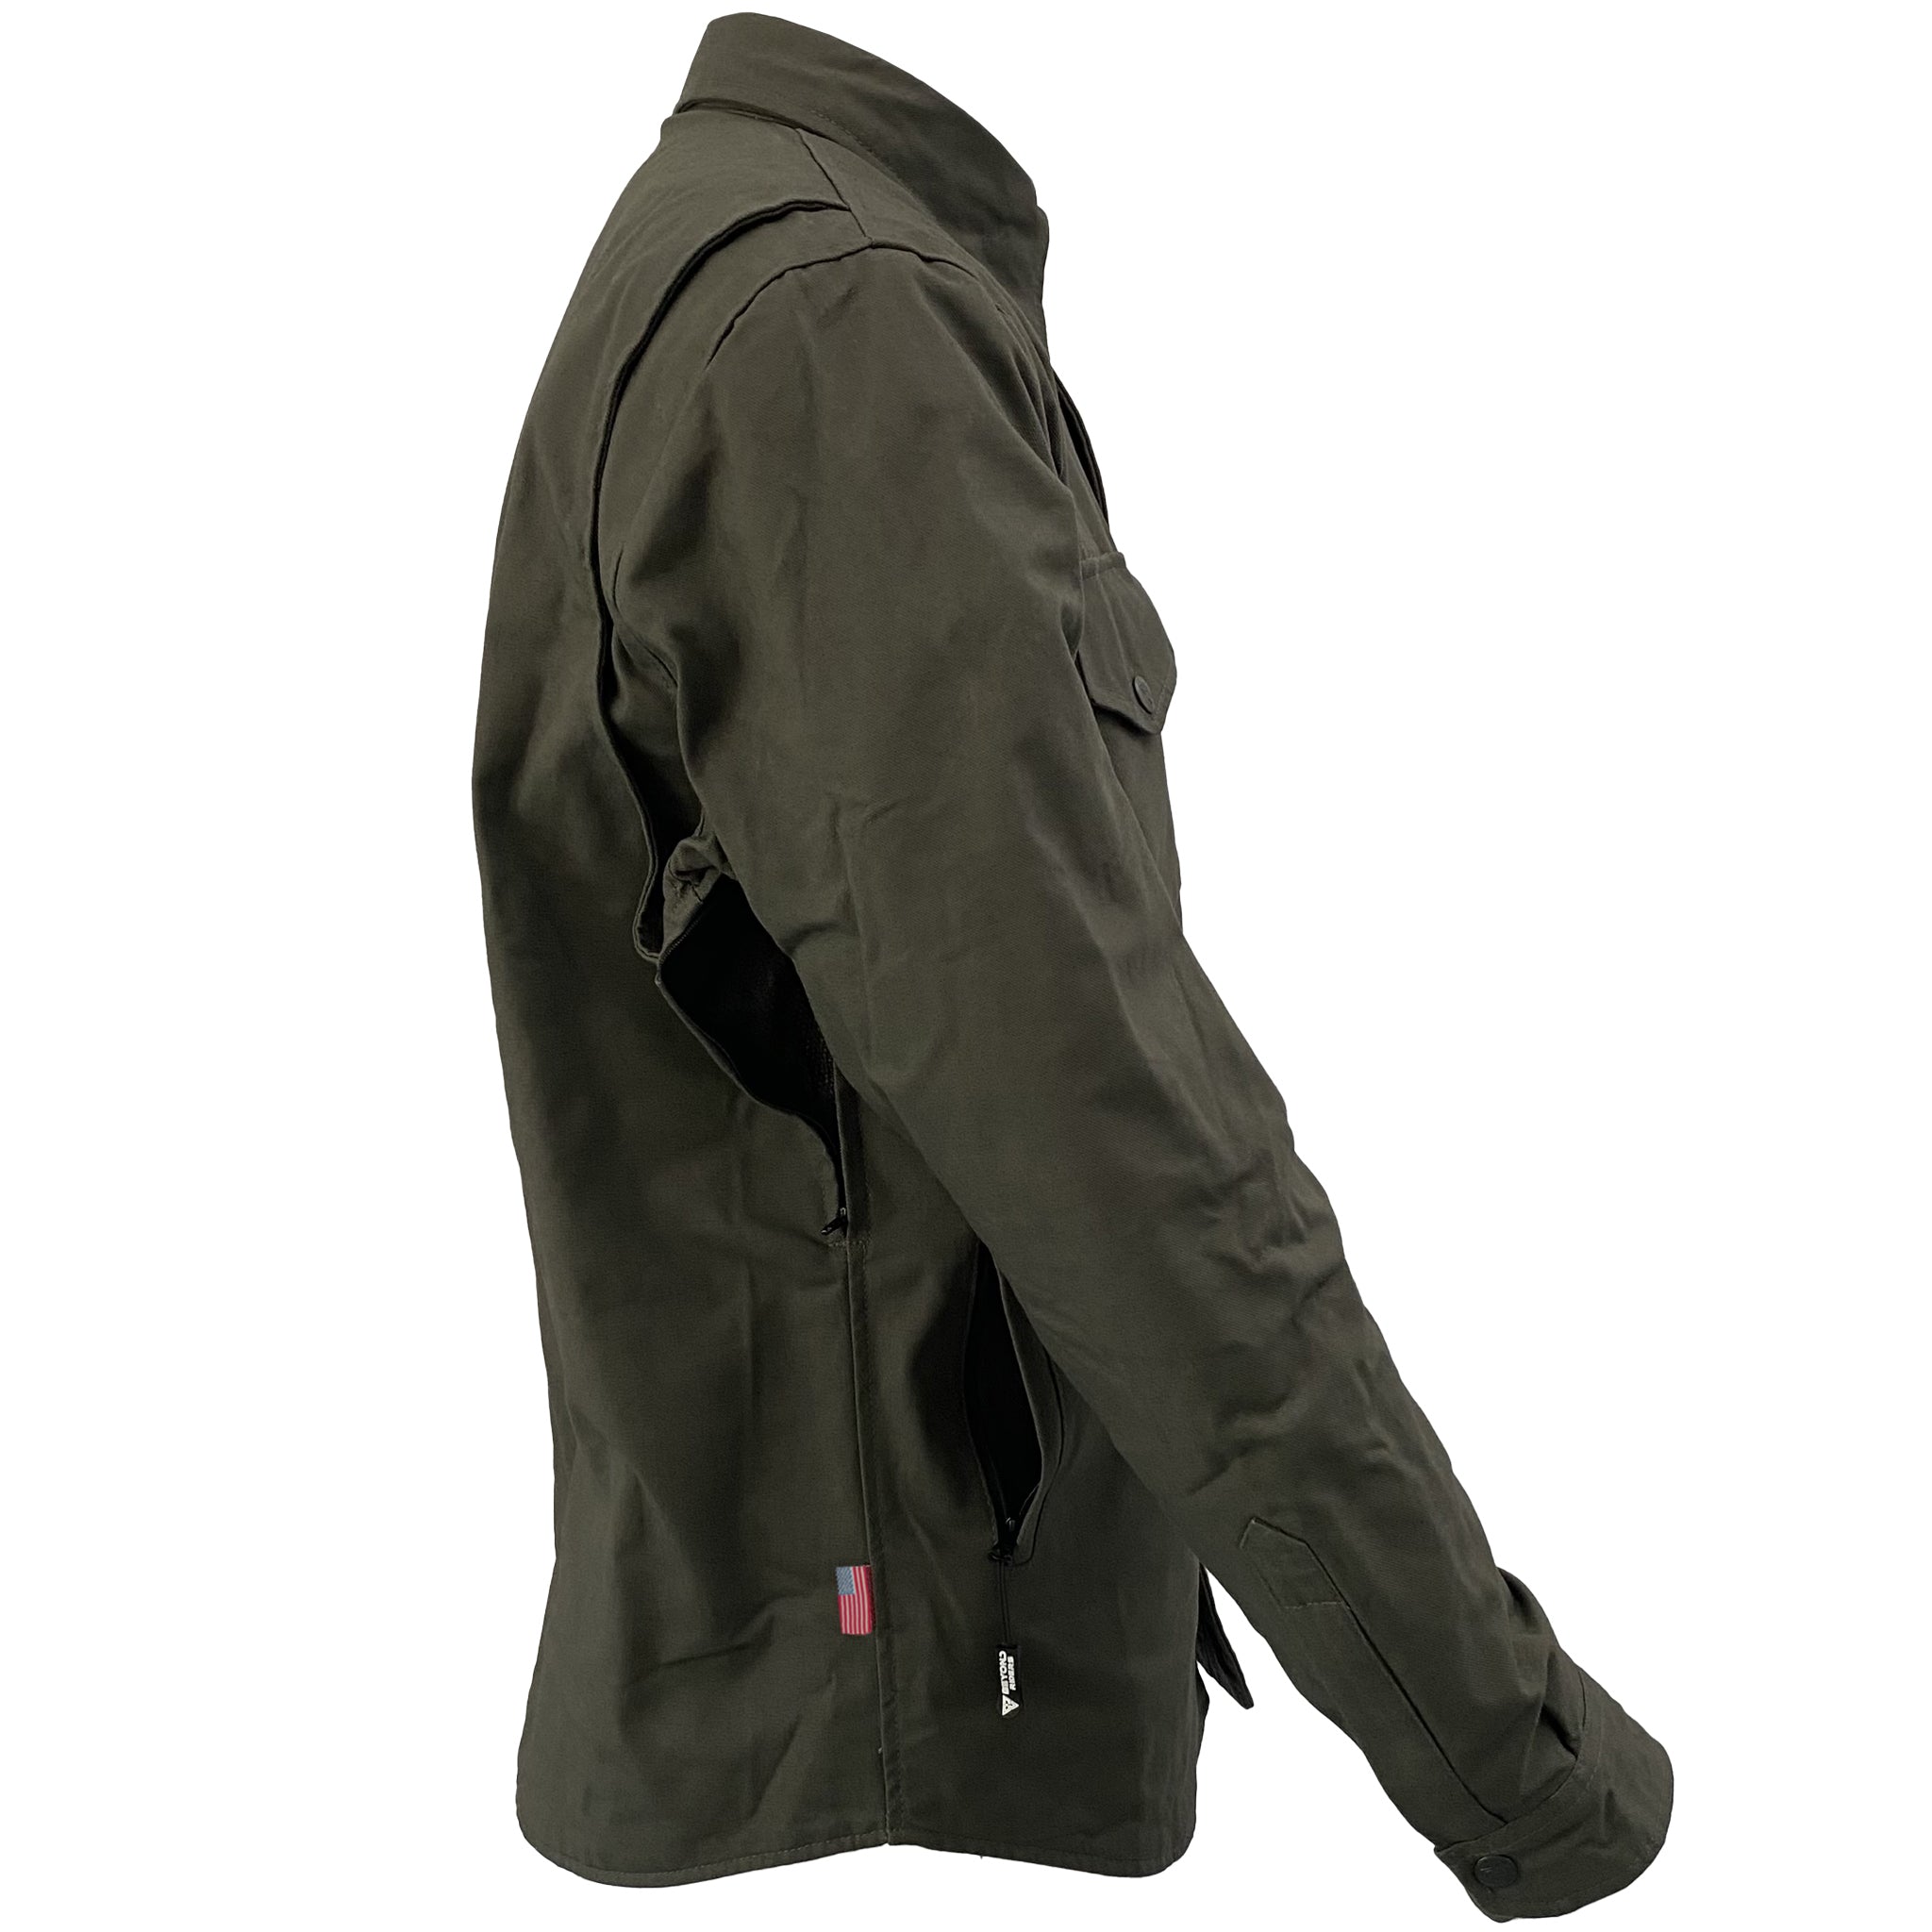 Protective Canvas Jacket for Men - Army Green with Pads